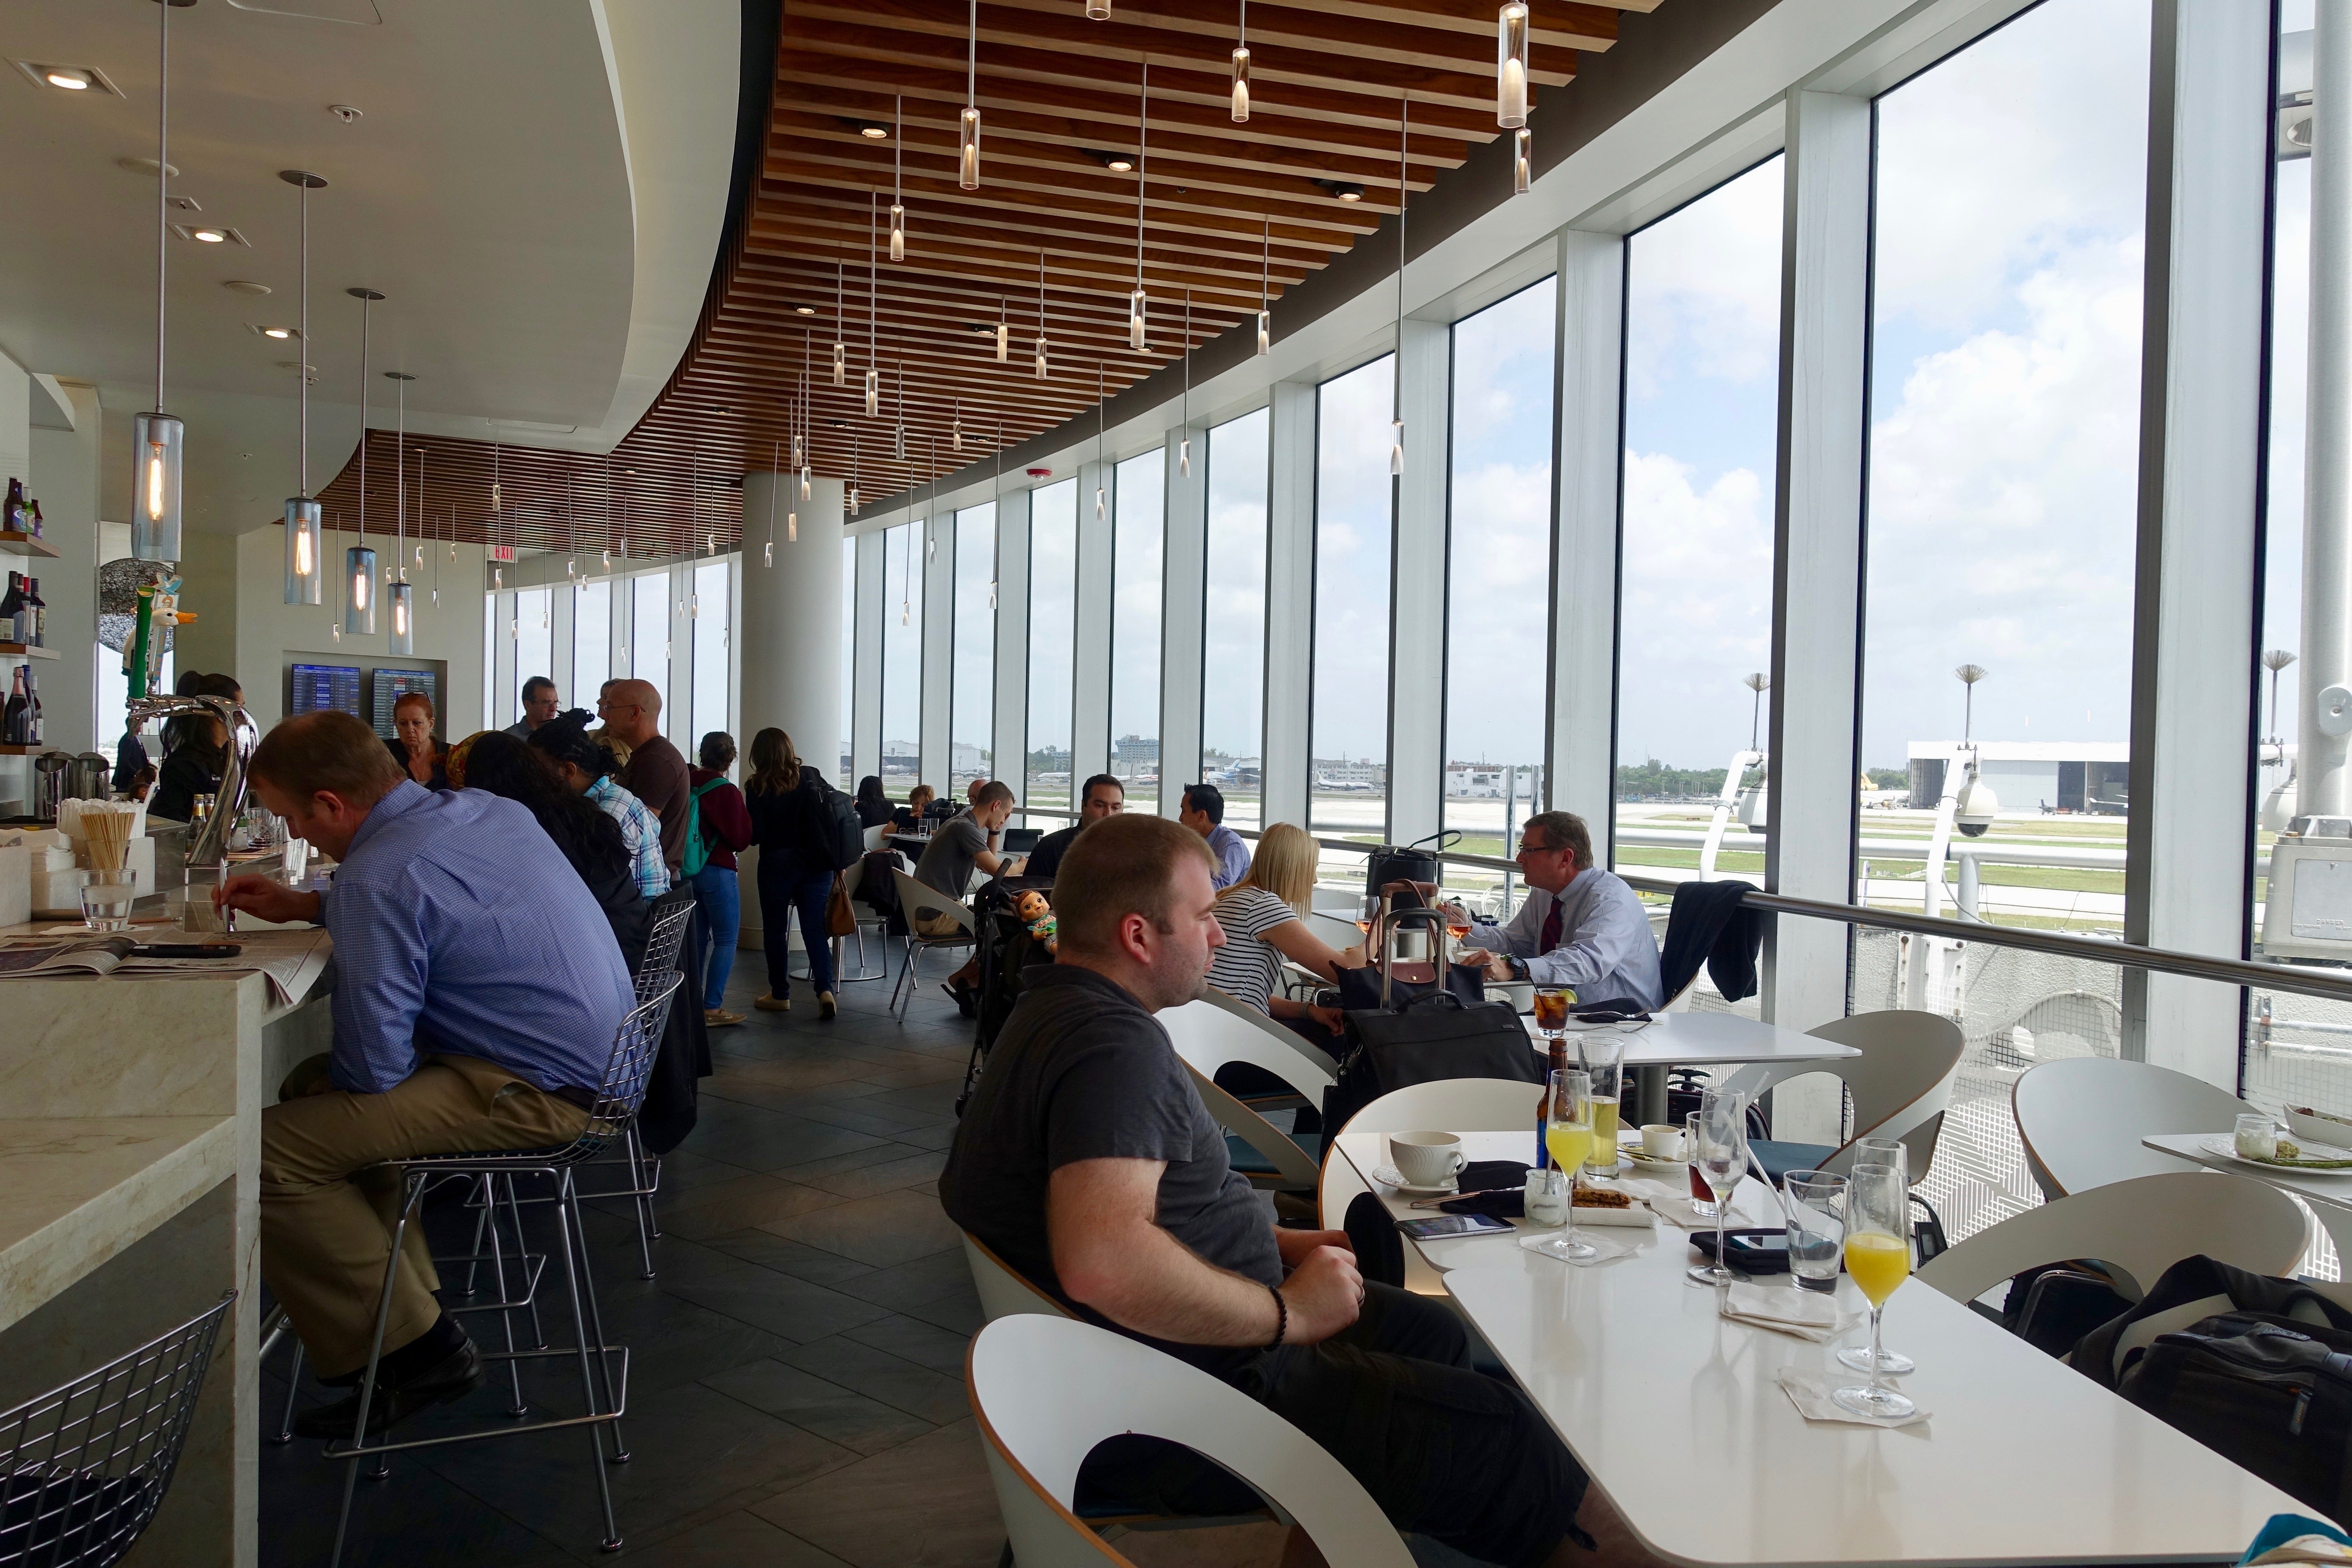 People sit at tables near viewing windows overlooking the runway at an airport lounge